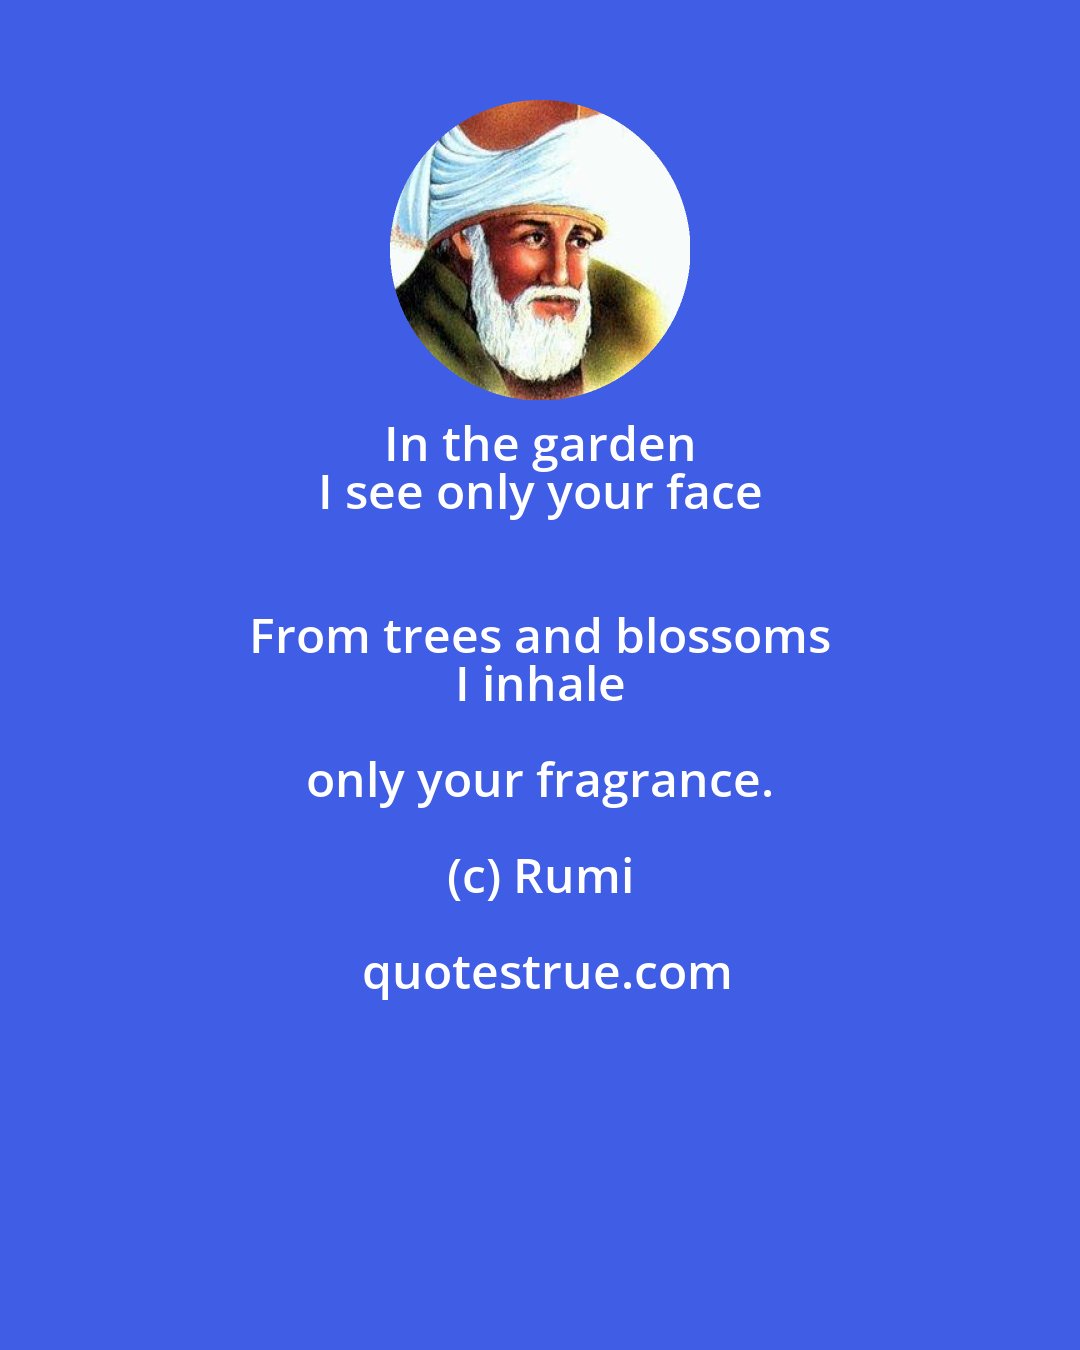 Rumi: In the garden 
 I see only your face 
 From trees and blossoms 
 I inhale only your fragrance.